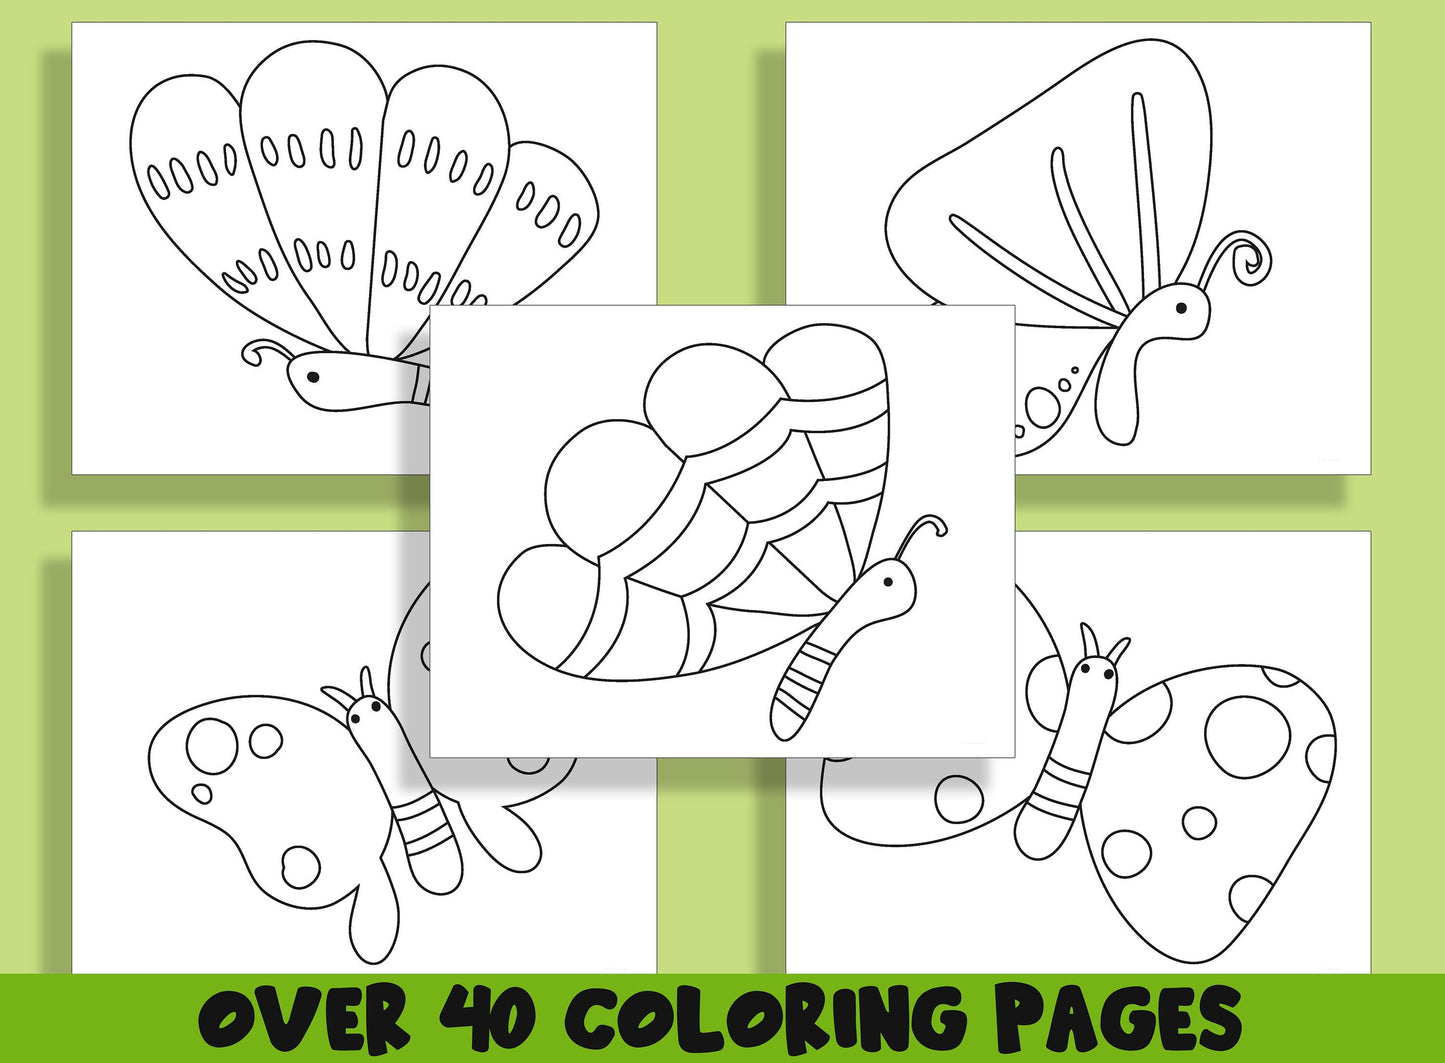 40 Printable Coloring Pages for Kids, Toddlers, Preschoolers, Kindergarten, Homeschool, Elementary School Children to Print and Color